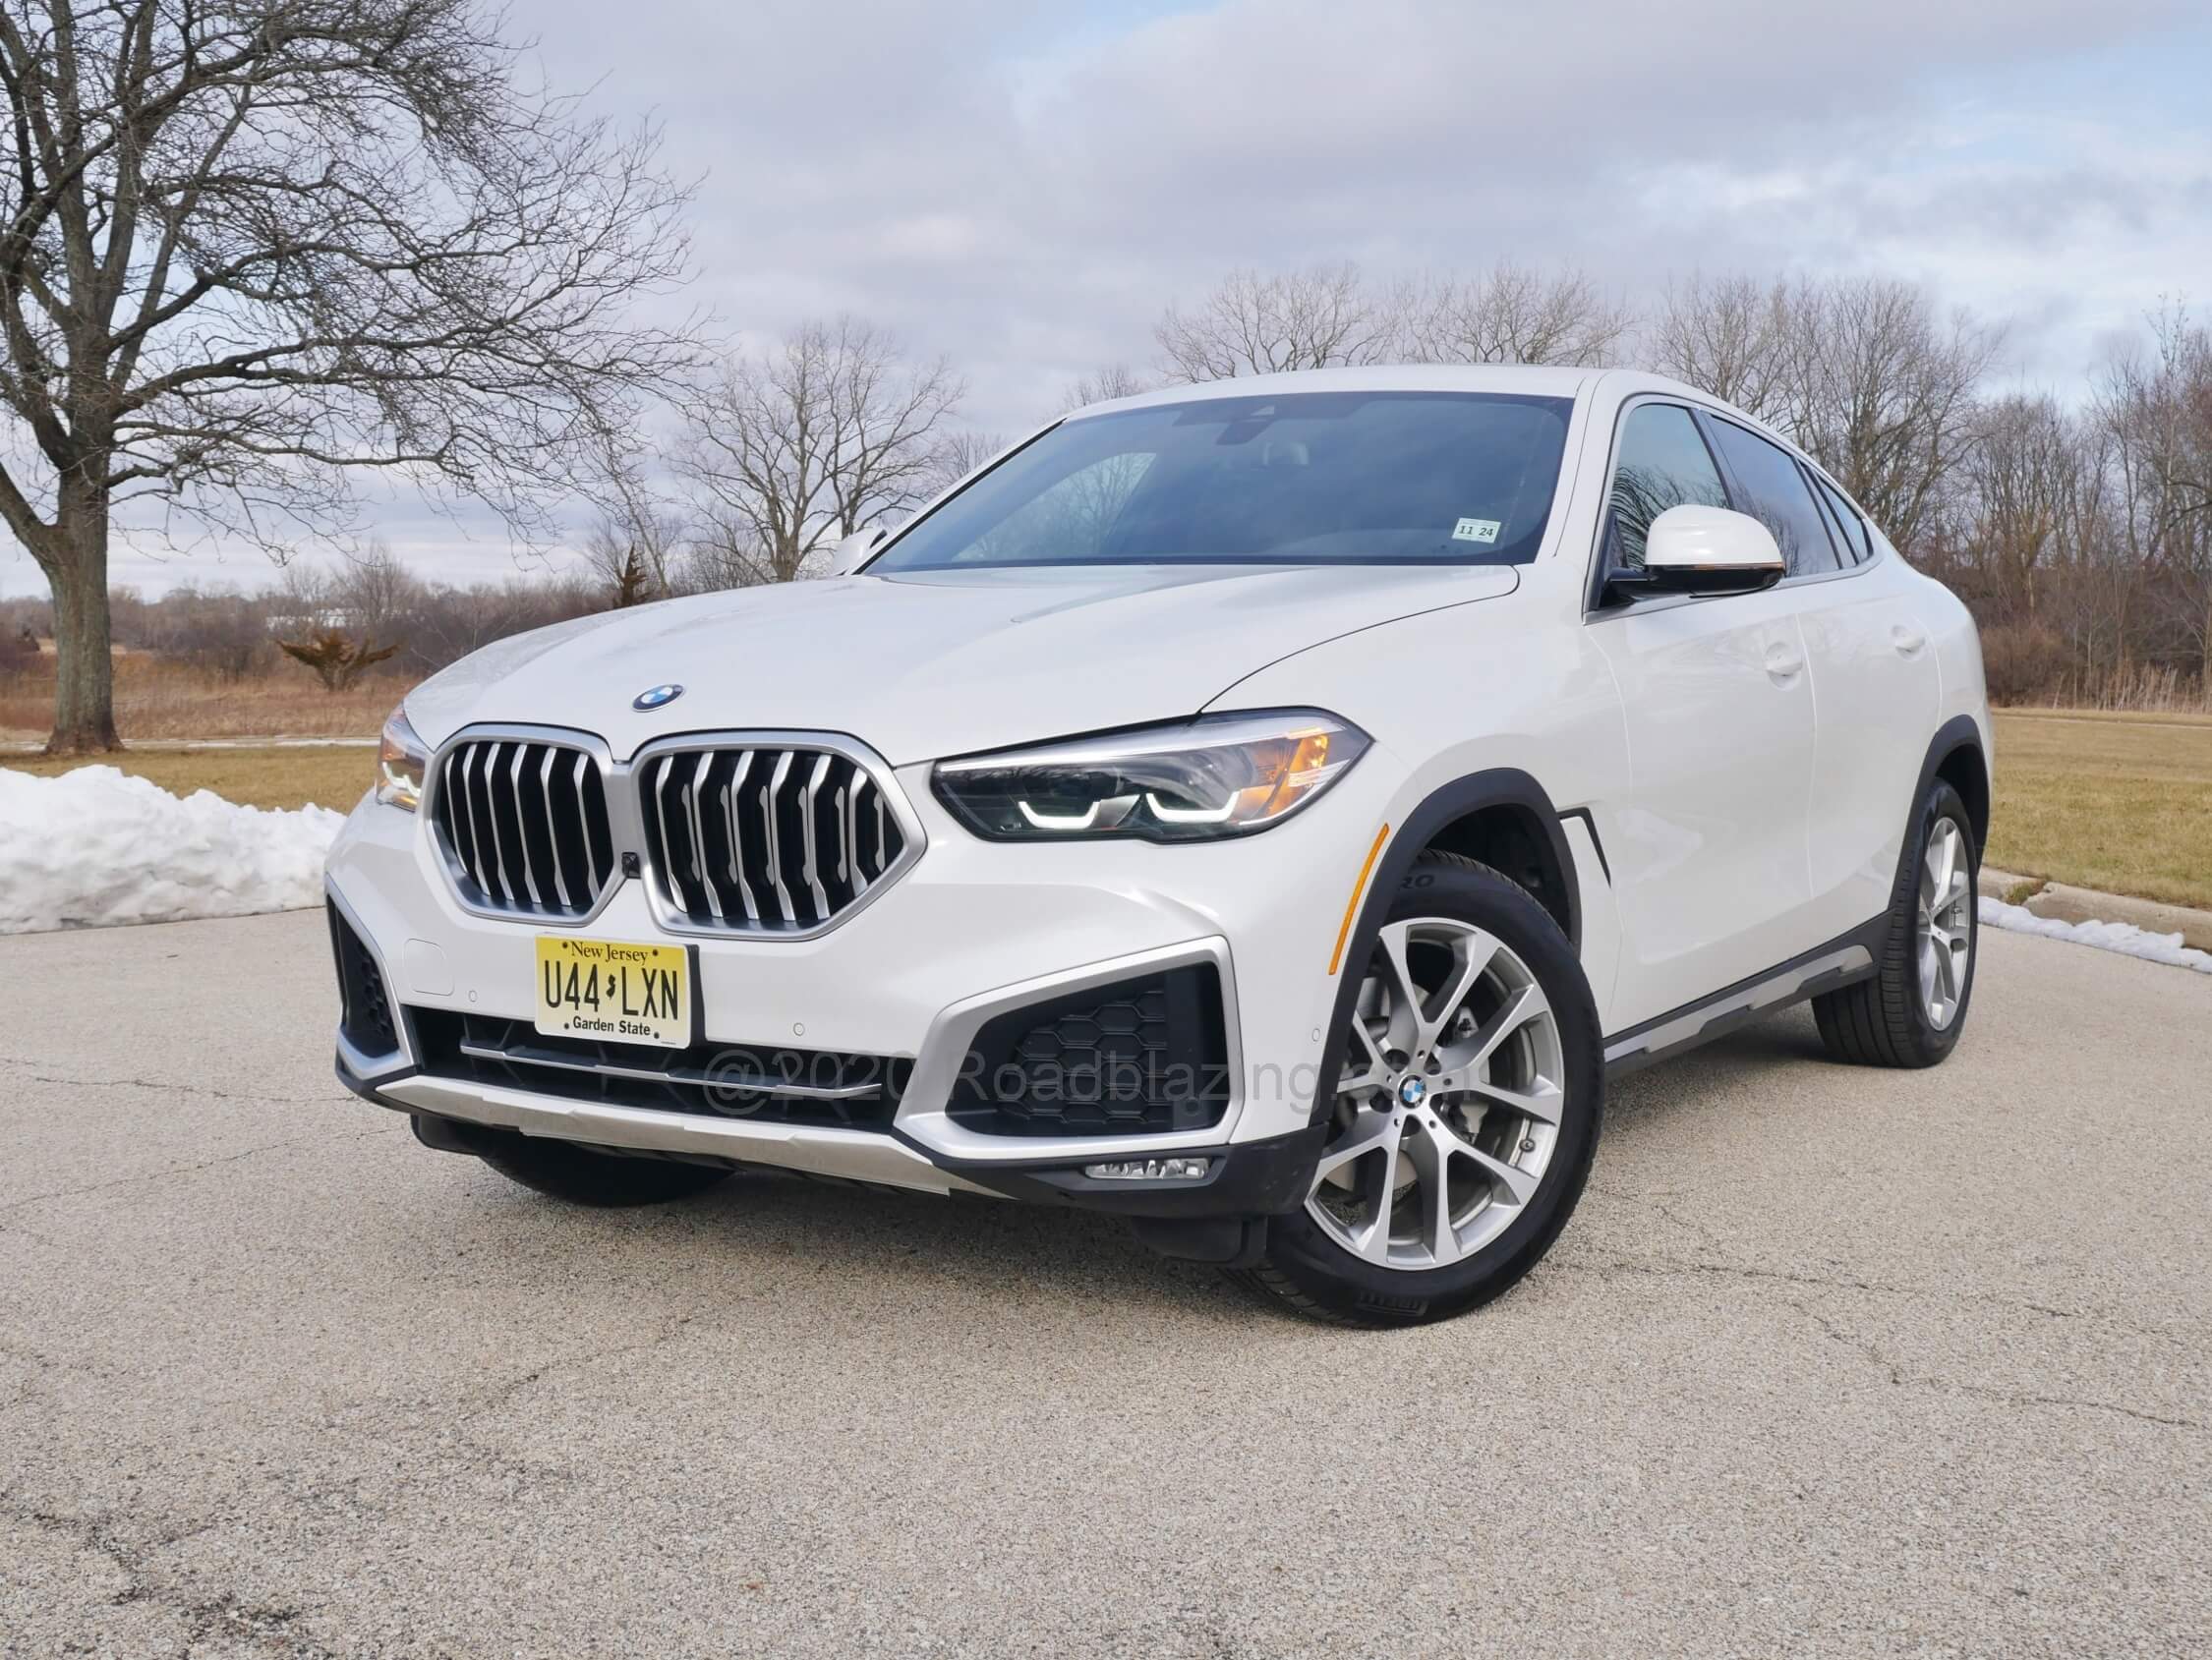 2020 BMW X6 xDrive 40i: Less oblique than before with a spillover grille, chiseled fascia, lower corner inlets and brake ducts, narrower LED lamps housings.